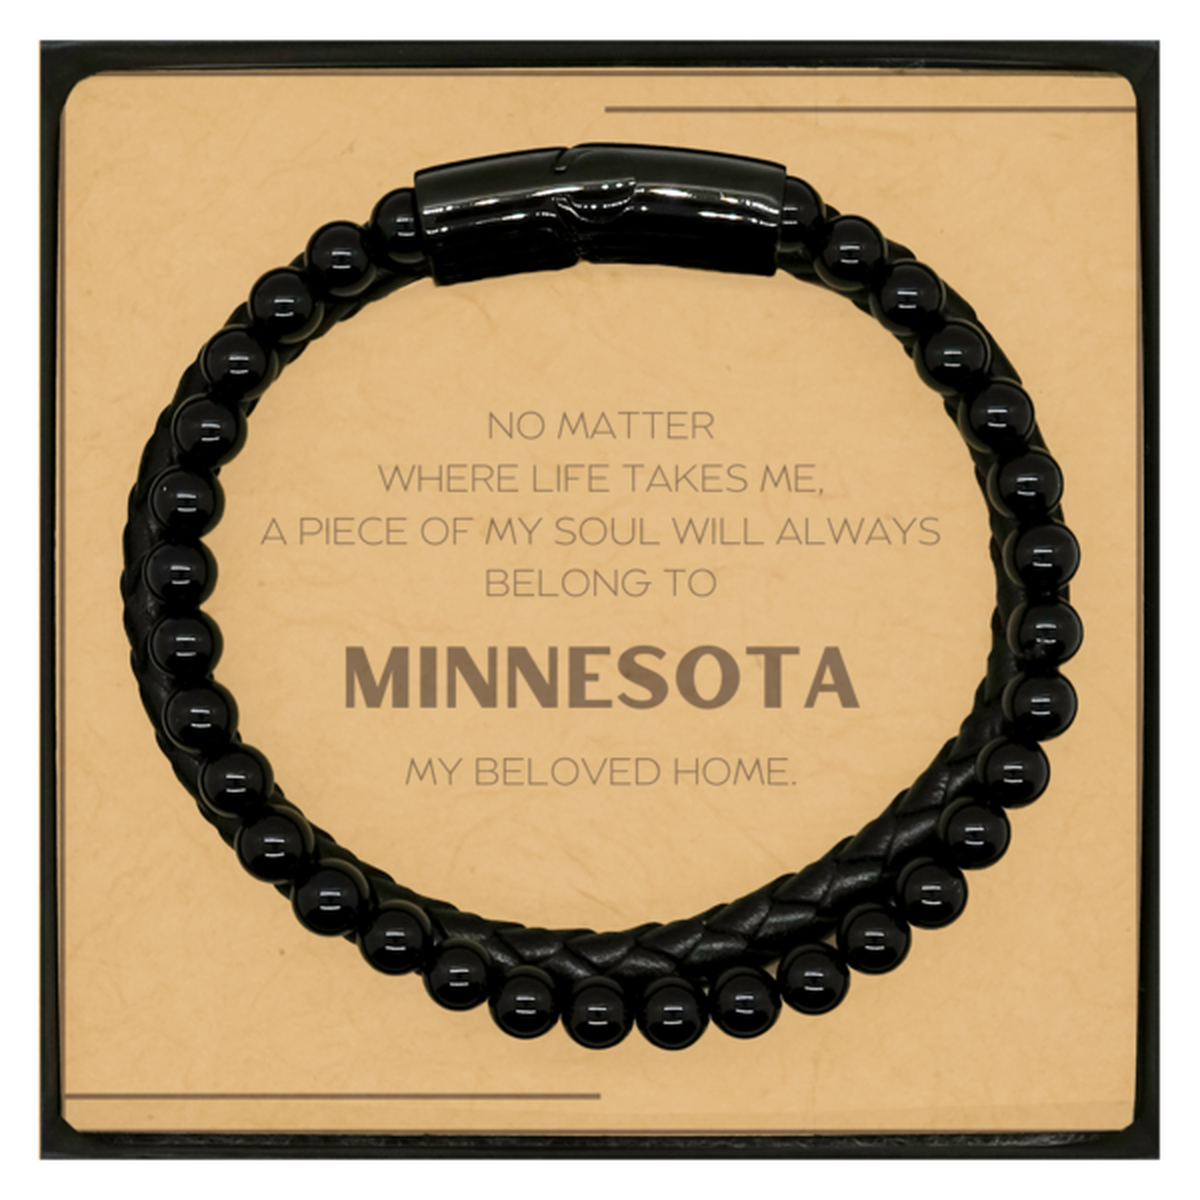 Love Minnesota State Gifts, My soul will always belong to Minnesota, Proud Stone Leather Bracelets, Birthday Christmas Unique Gifts For Minnesota Men, Women, Friends